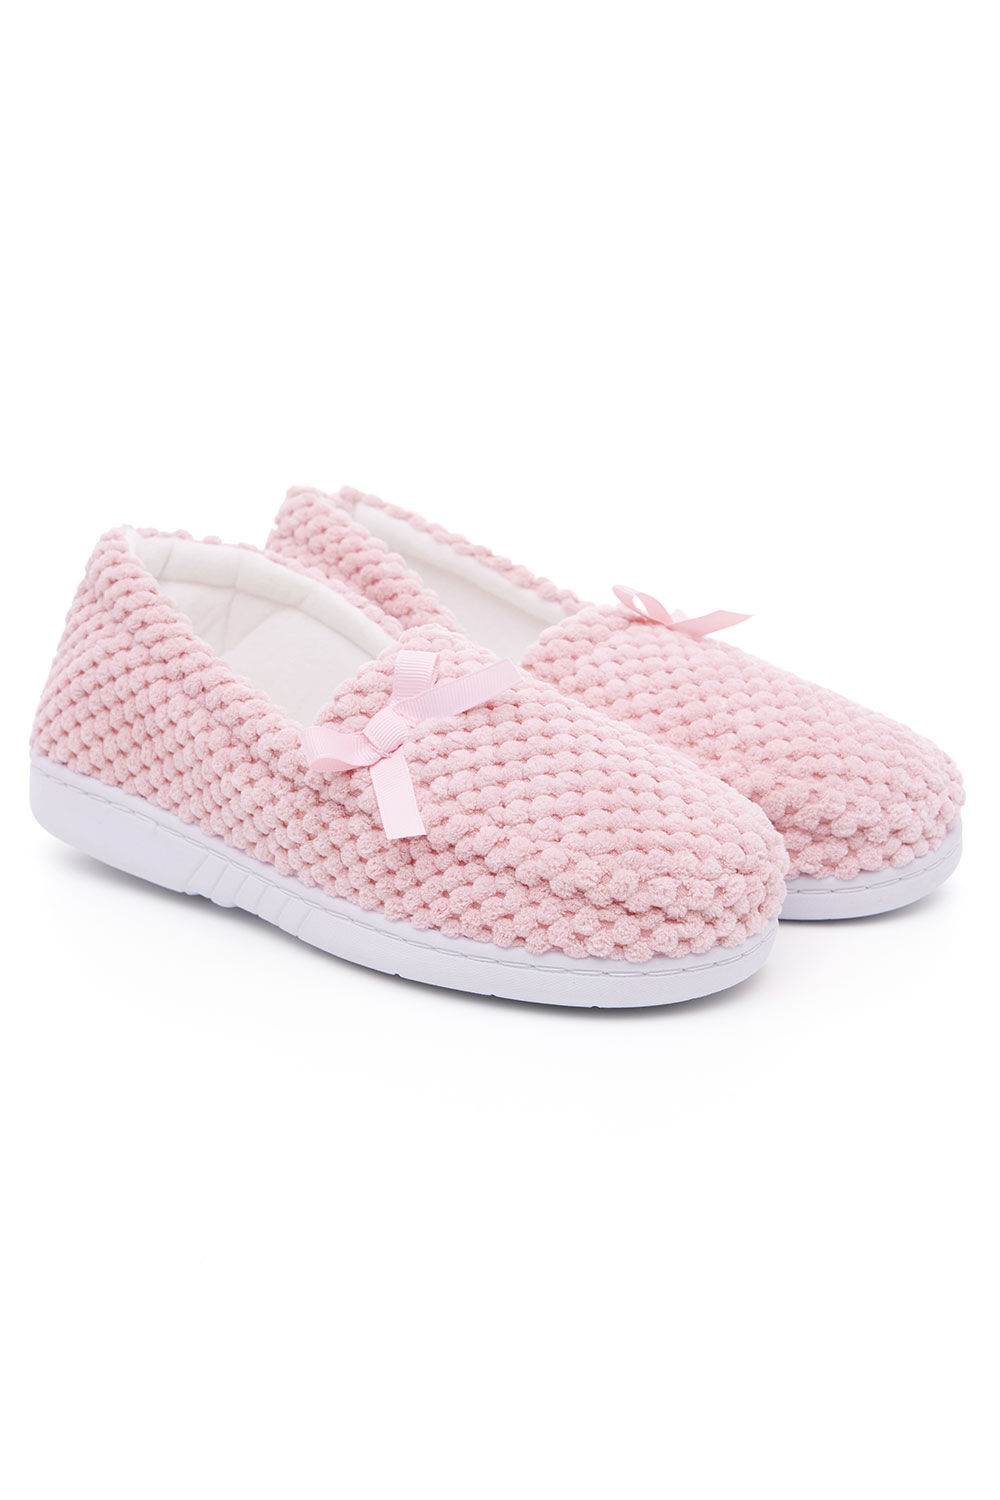 Bonmarche Pink Fleece Moccasin Slippers With Bow Detail, Size: 7